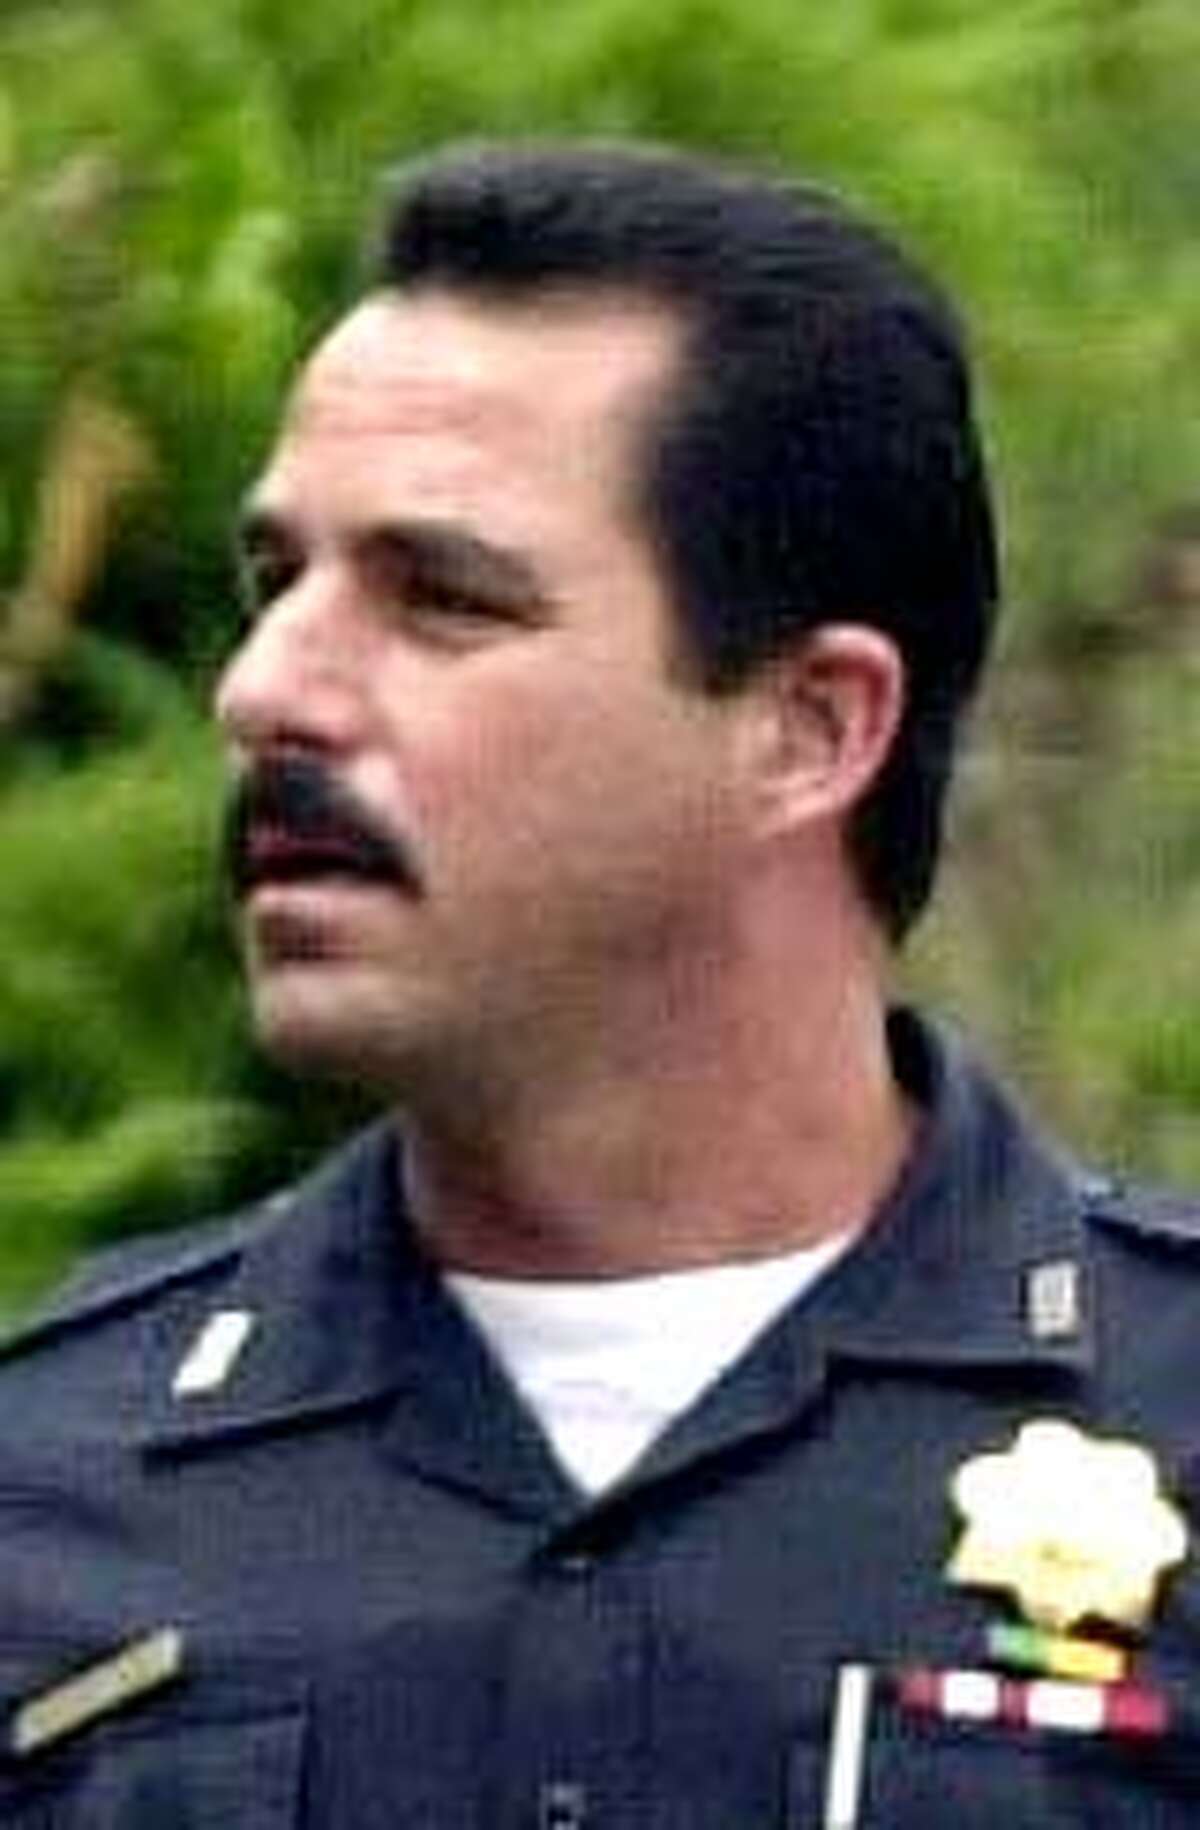 Pittsburg Police Department Inspector Ray Giacomelli, a 23-year vetern of the Pittsburg police force, was murdered Tuesday. (Contra Costa Times/Nader Khouri) SLUG: ROBBERY (HANDOUT PHOTO)